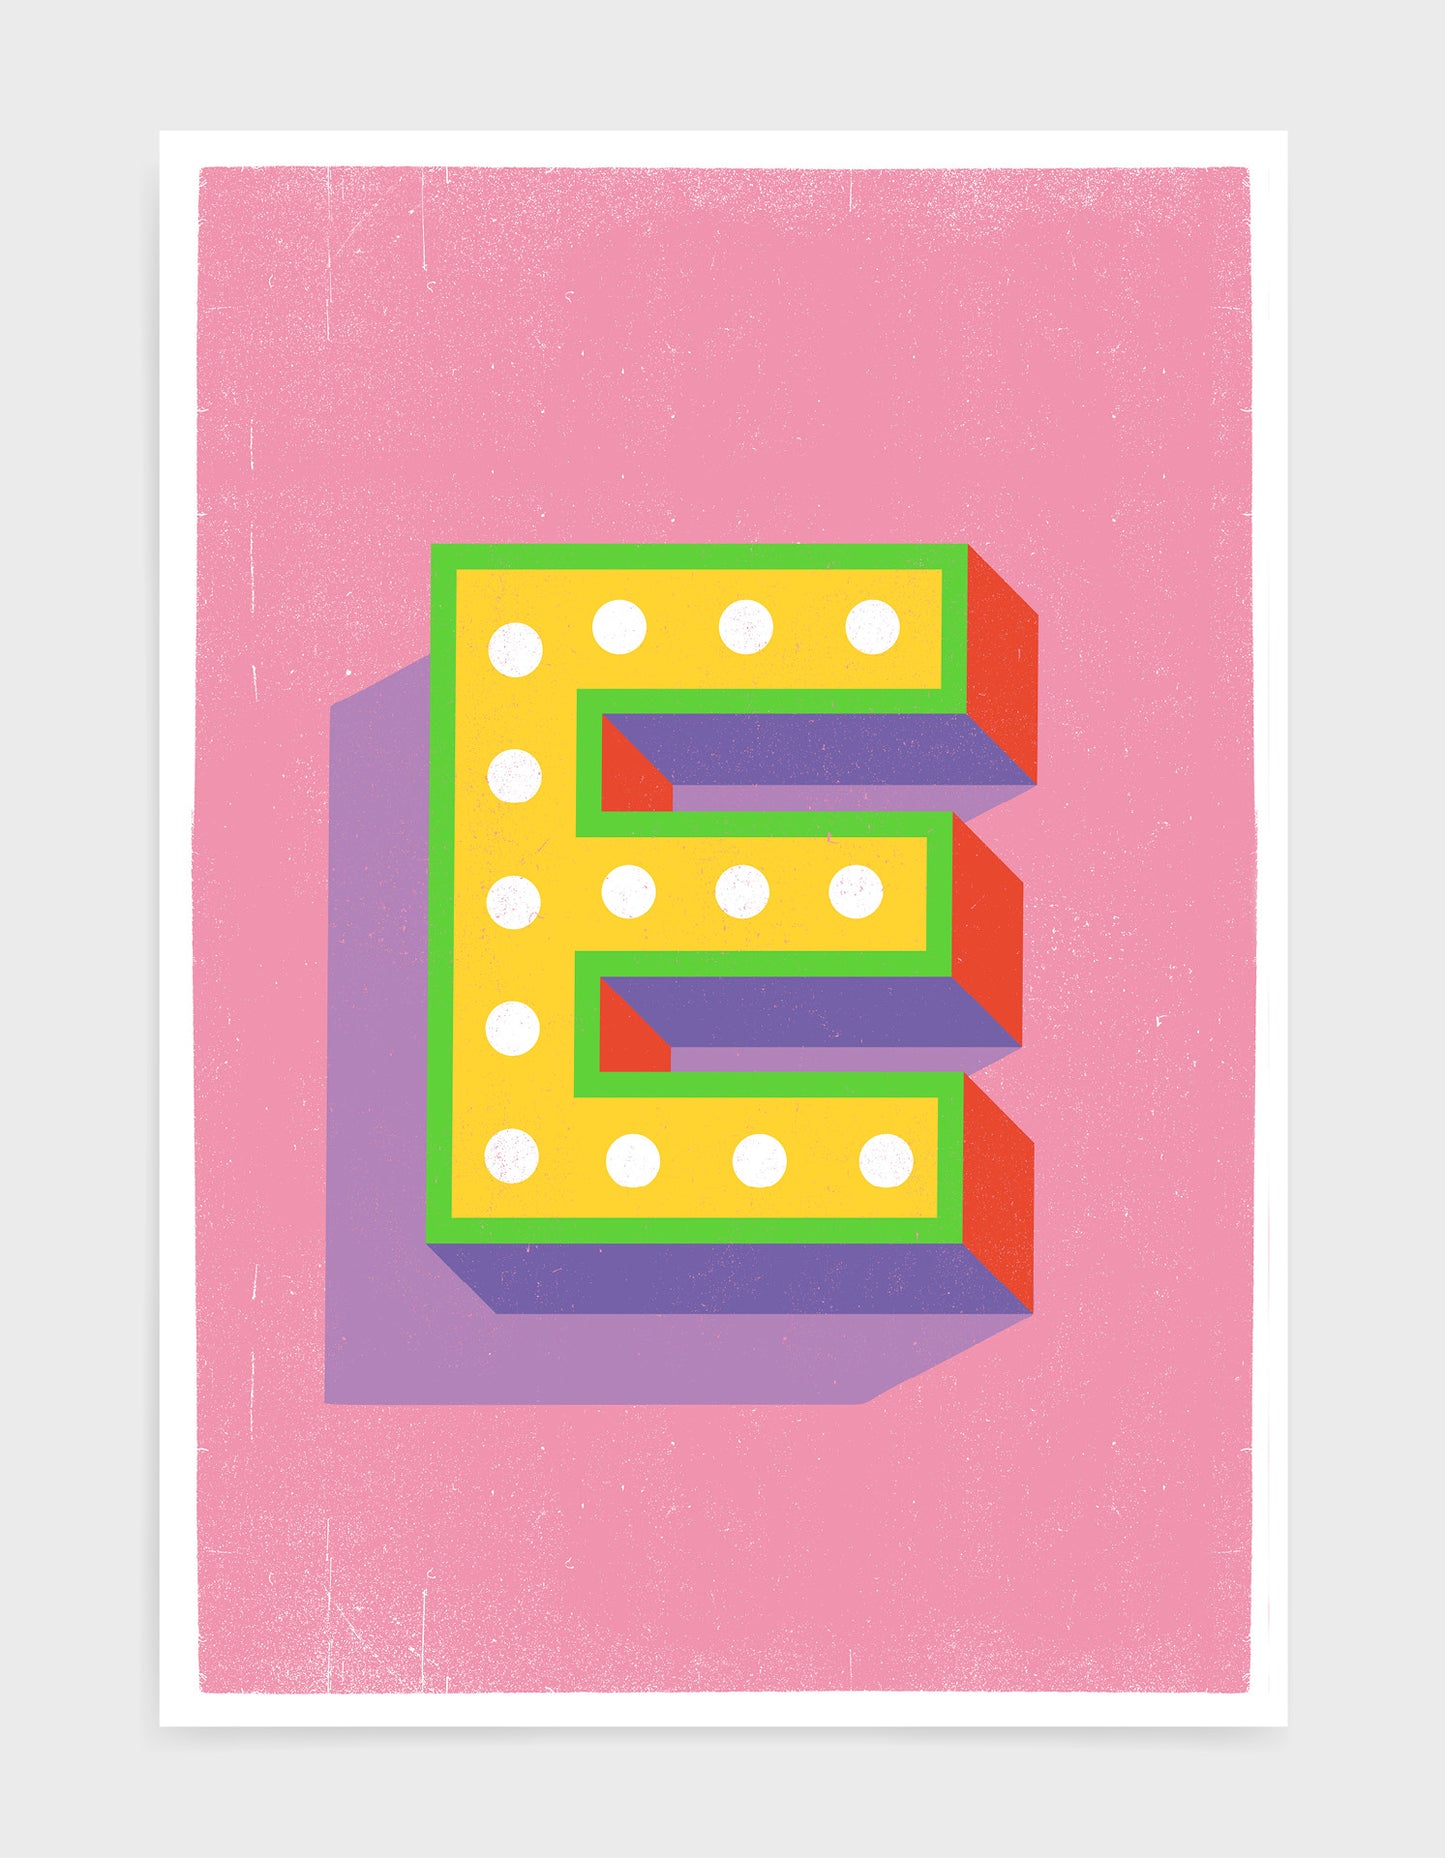 Alphabet print - lights on font in yellow against a pink background - letter e